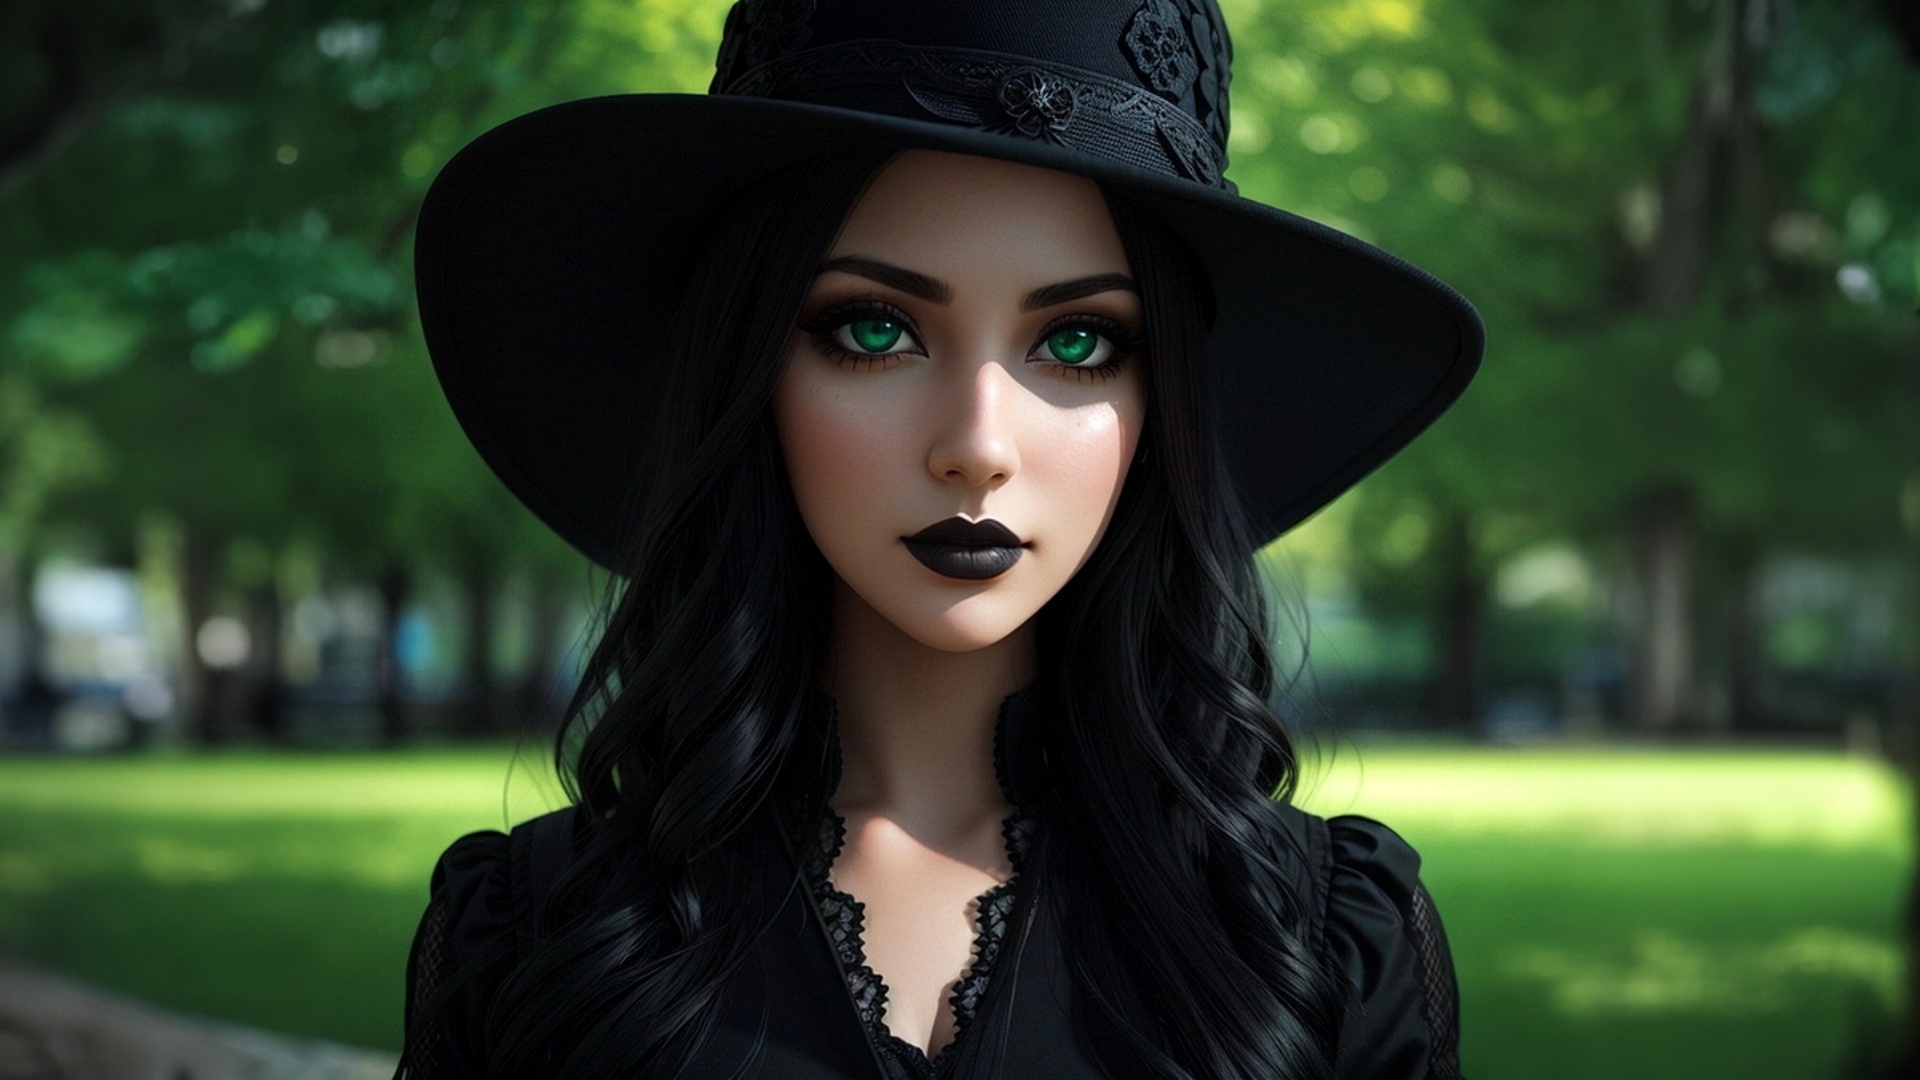 Portrait of a girl in a black hat in the park